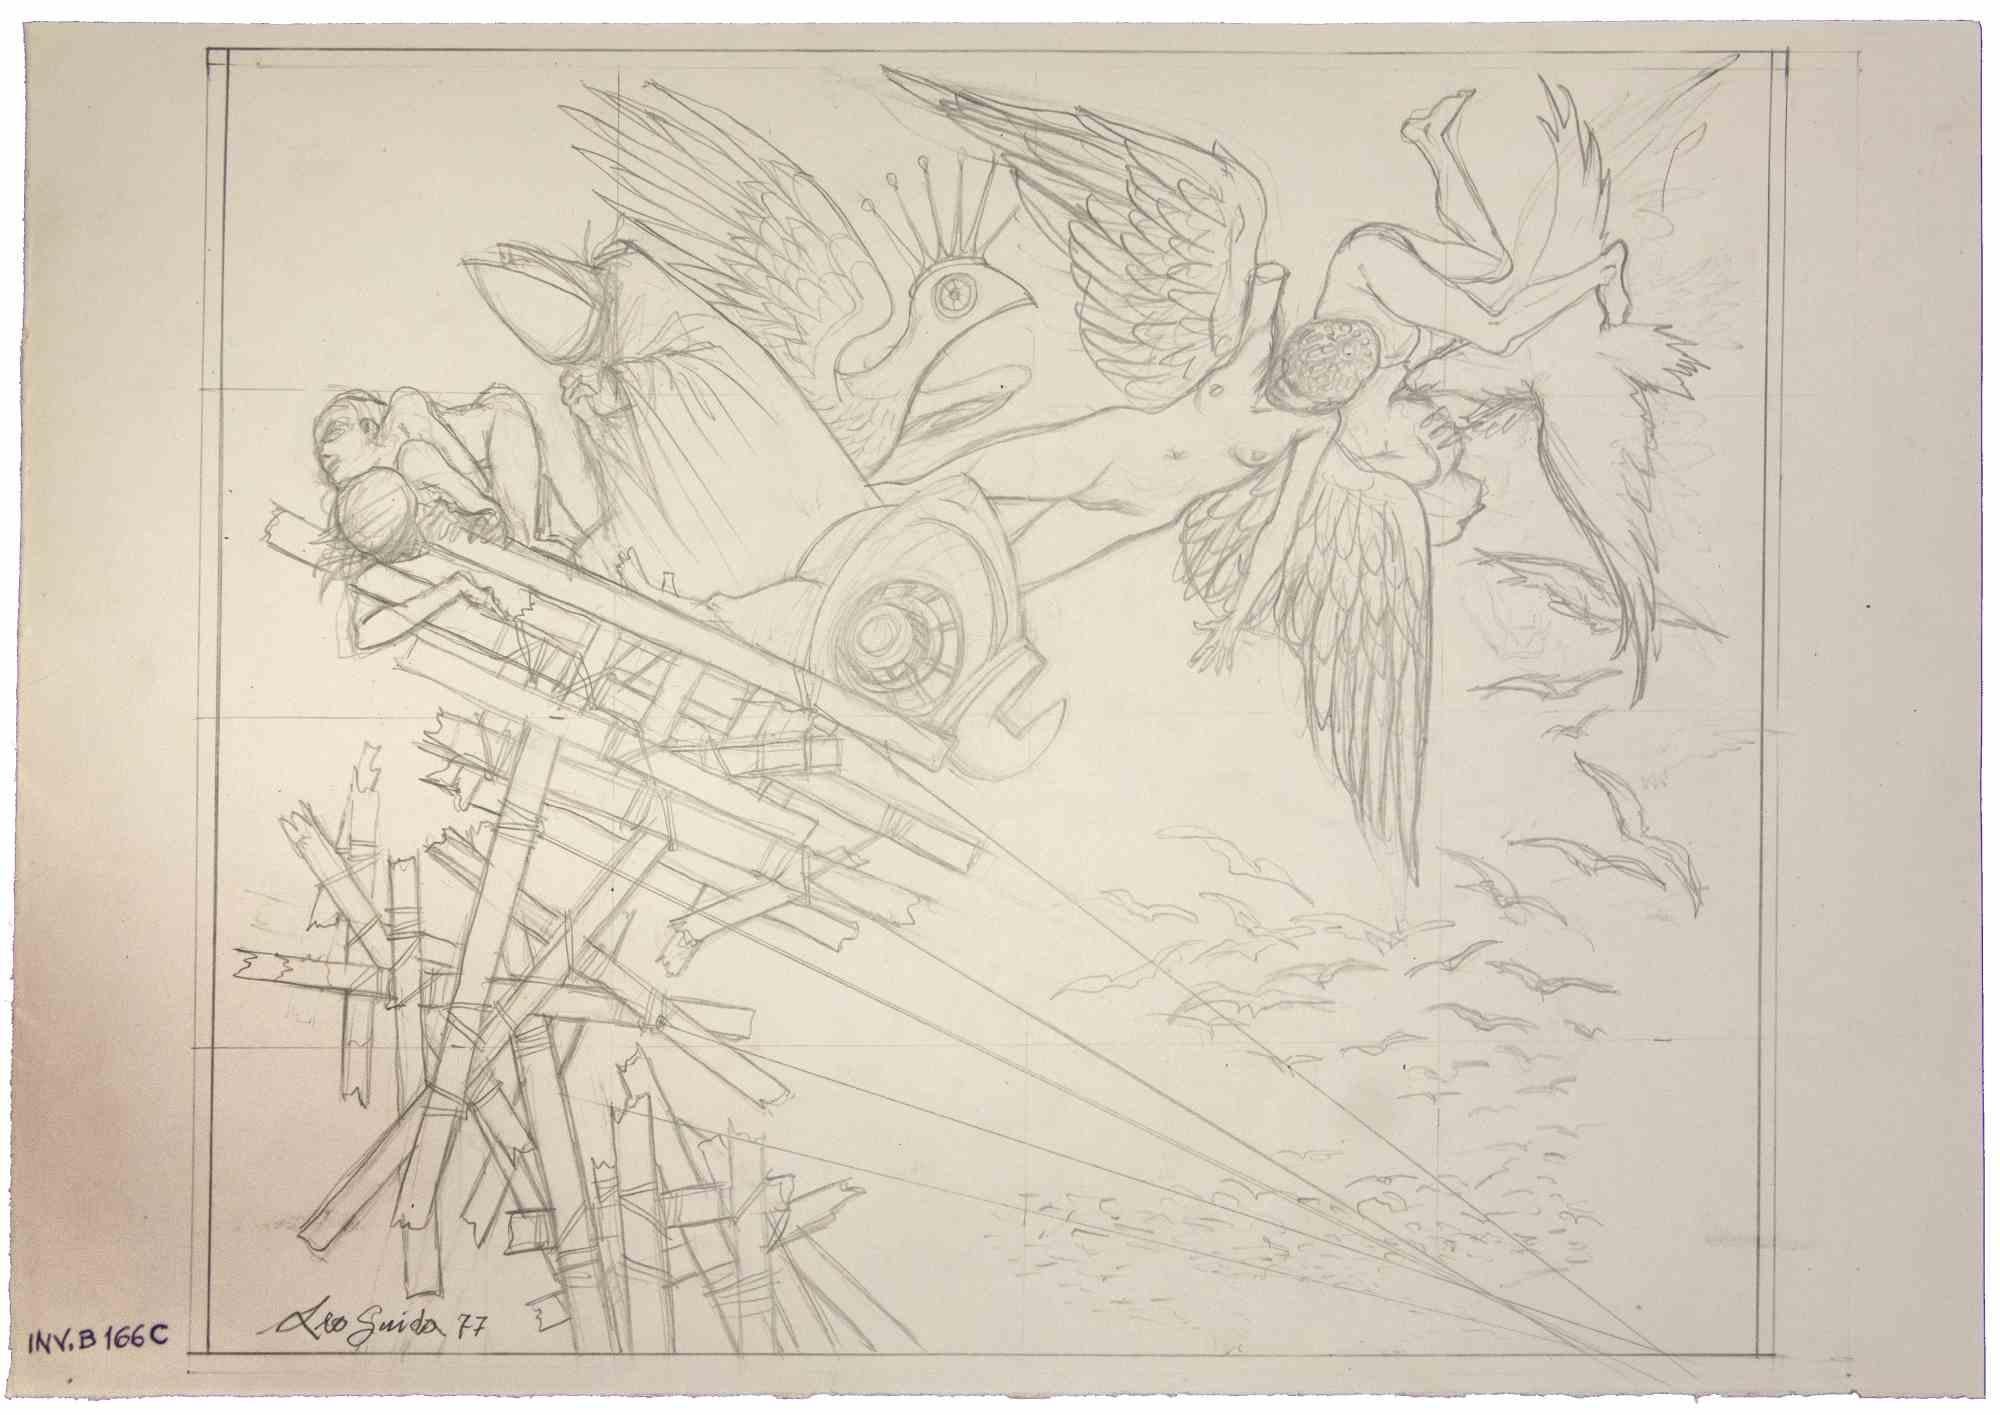 The Collapse is an original Contemporary artwork realized  in 1977  by the italian Contemporary artist Leo Guida (1992 - 2017).

Original drawing pencil on ivory-colored paper.
 
Hand-signed and dated on the lower margin. Cat. INV.B 166C

In this